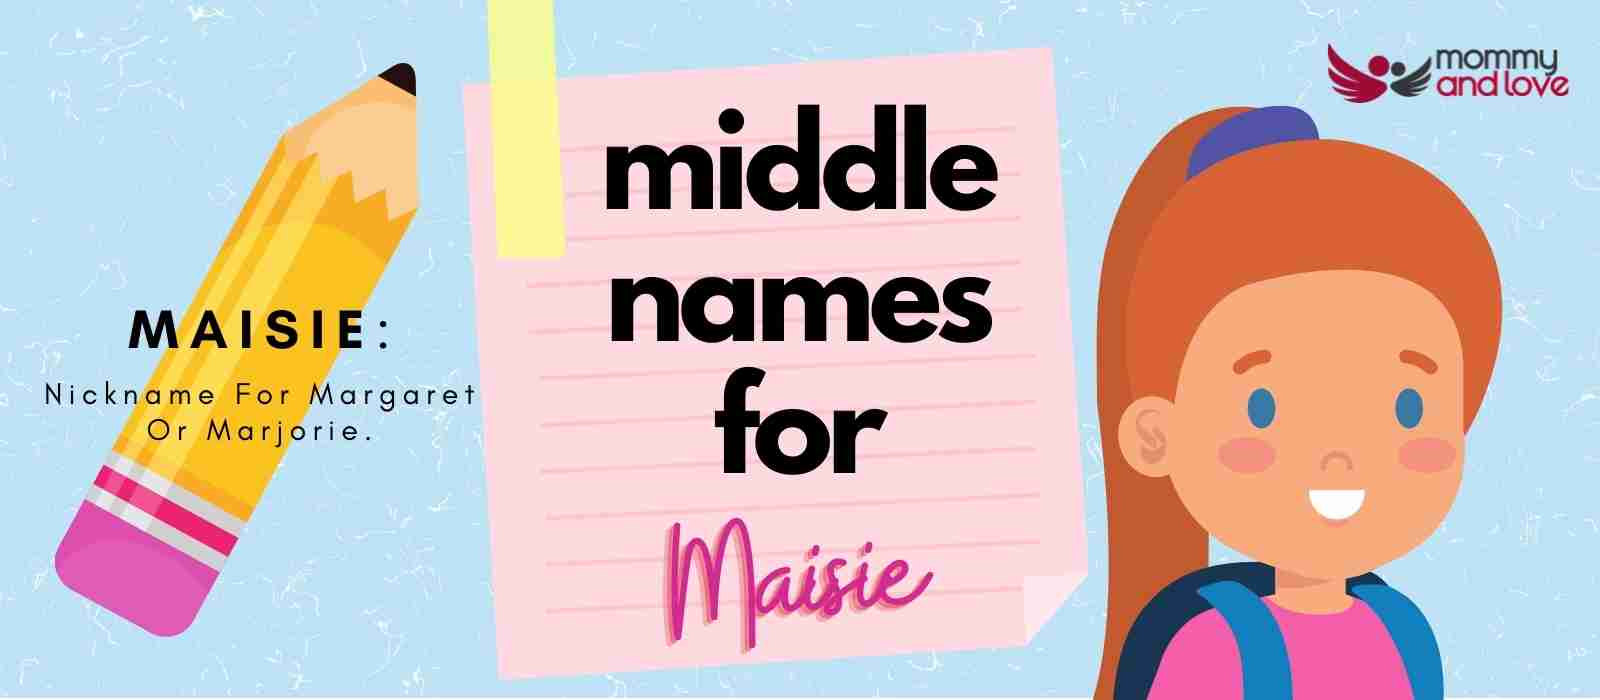 Middle Names for Maisie